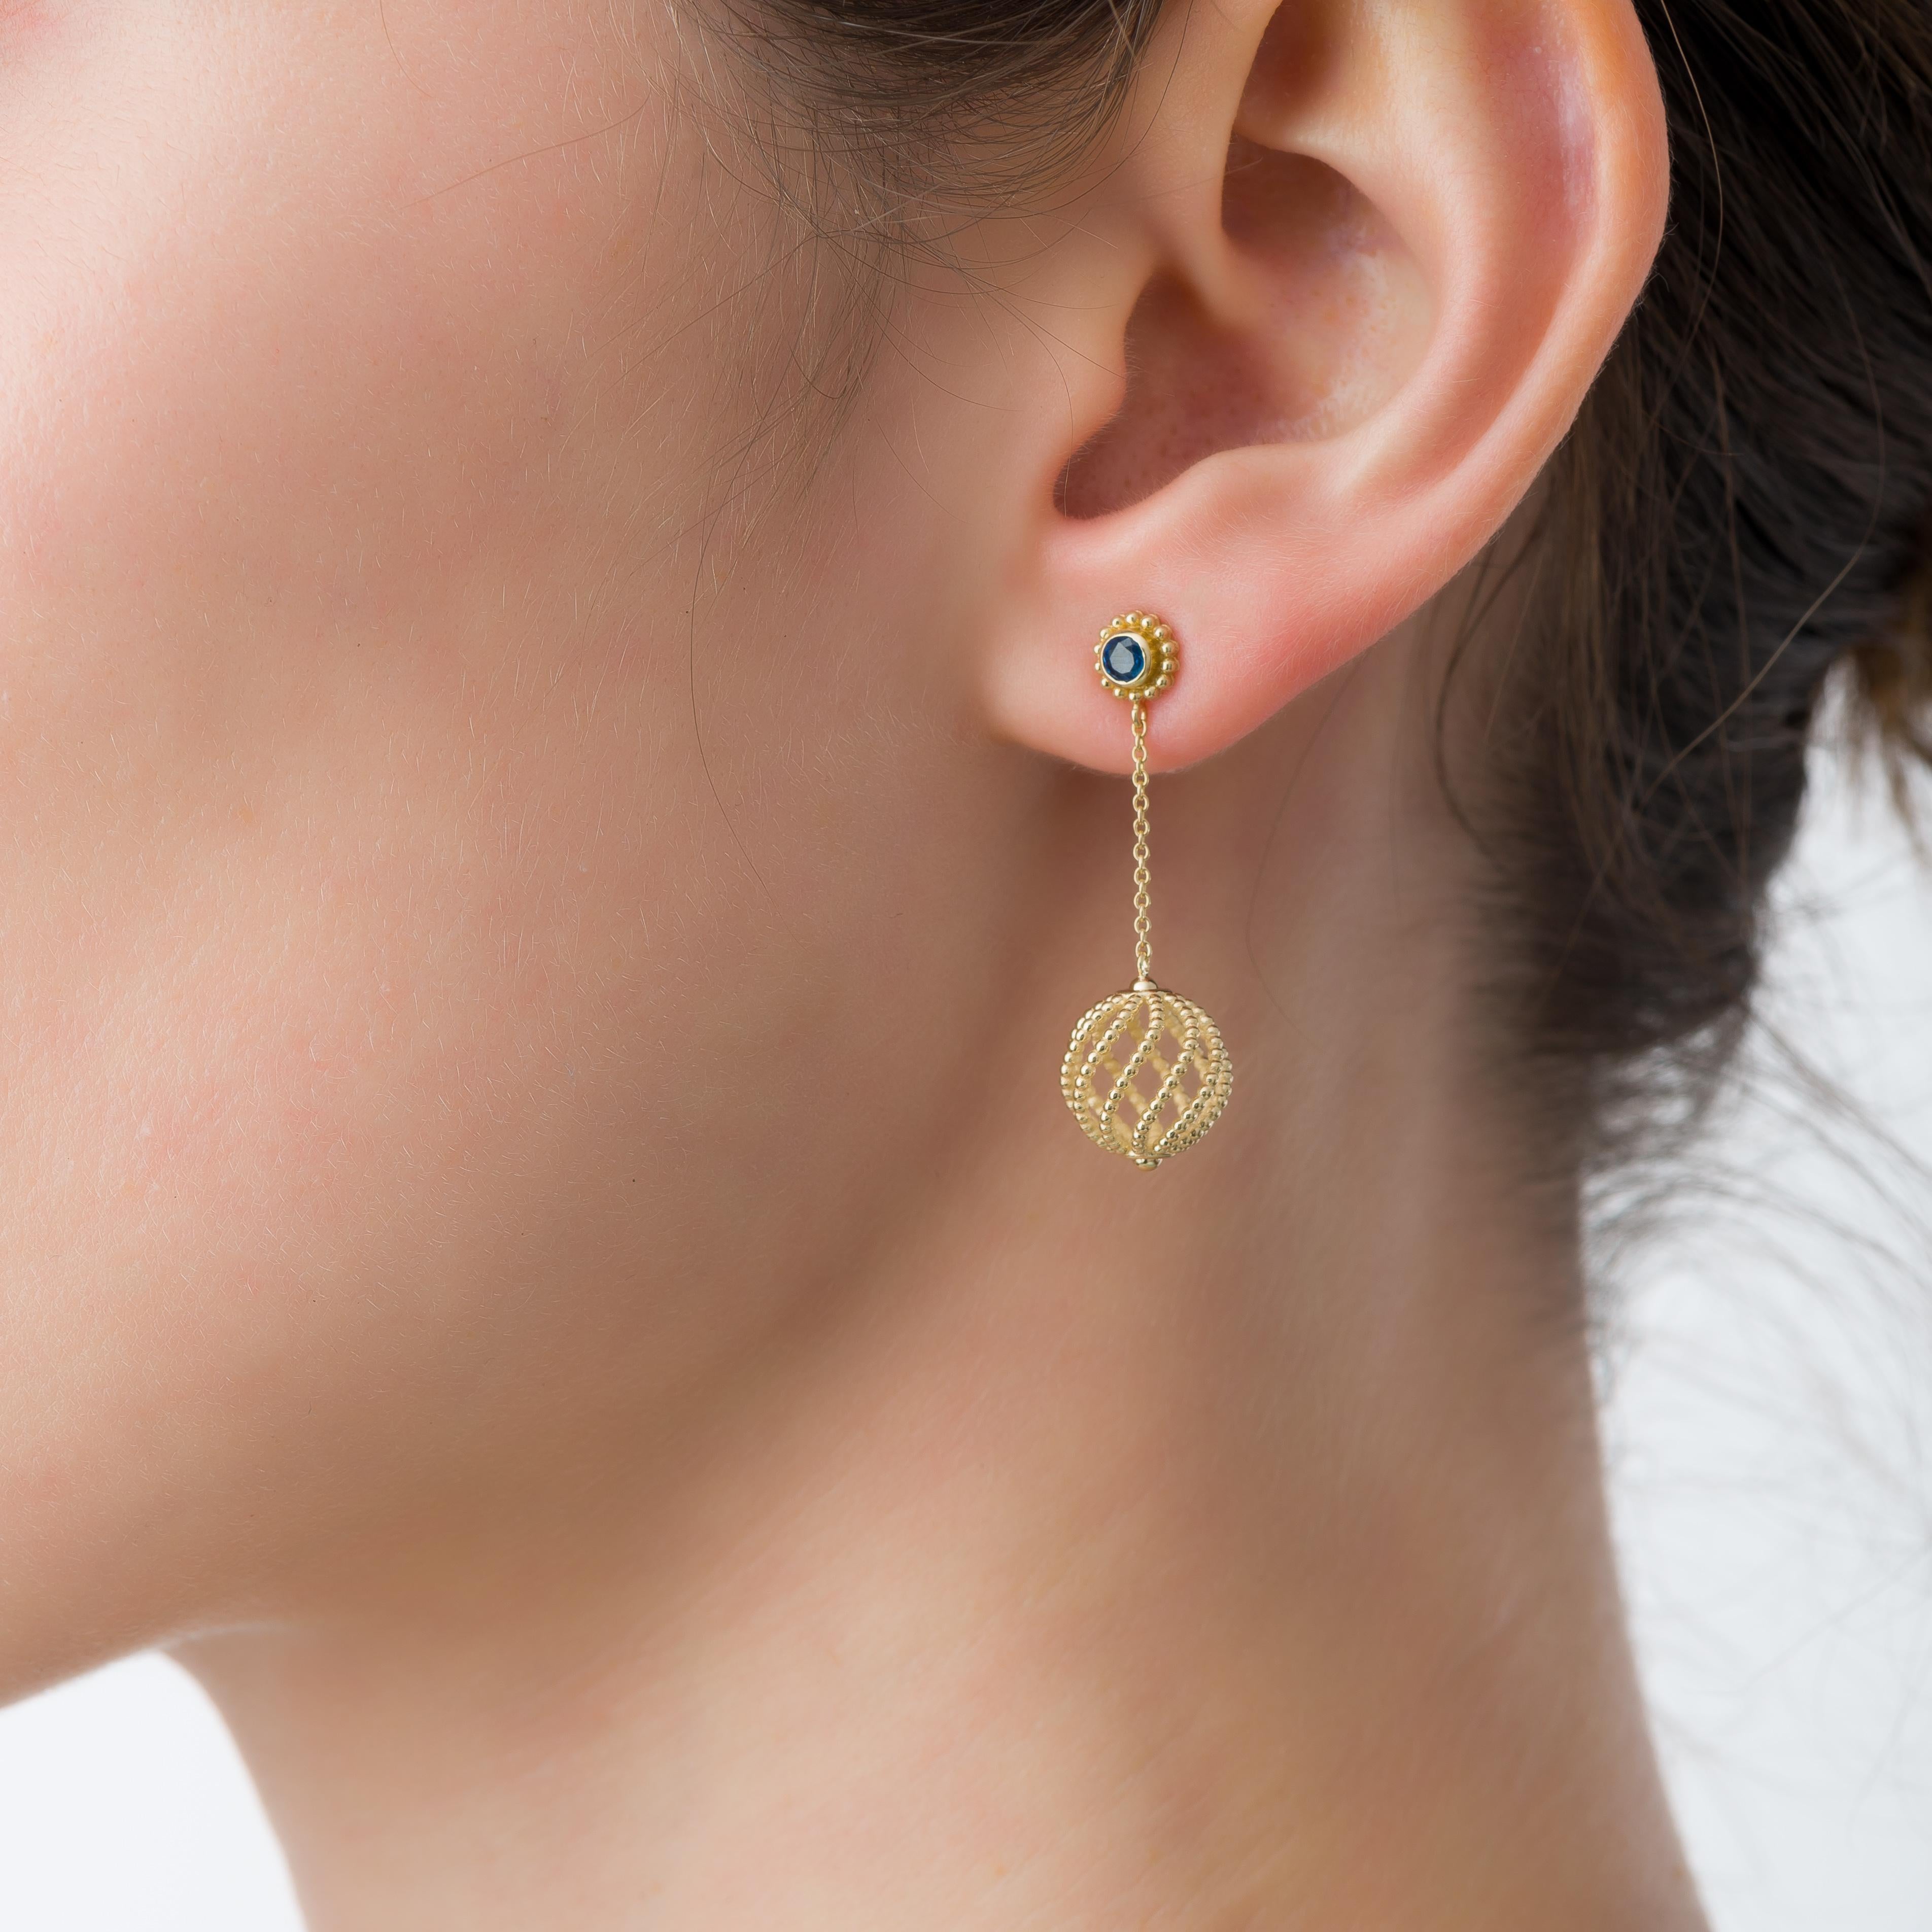 Grace your ears with these exquisite gold drop earrings, delicately handcrafted in an open ball shape adorned with intricate granulations, they feature a majestic sapphire gracing each earring, symbolizing wisdom and allure.

100% handmade in our